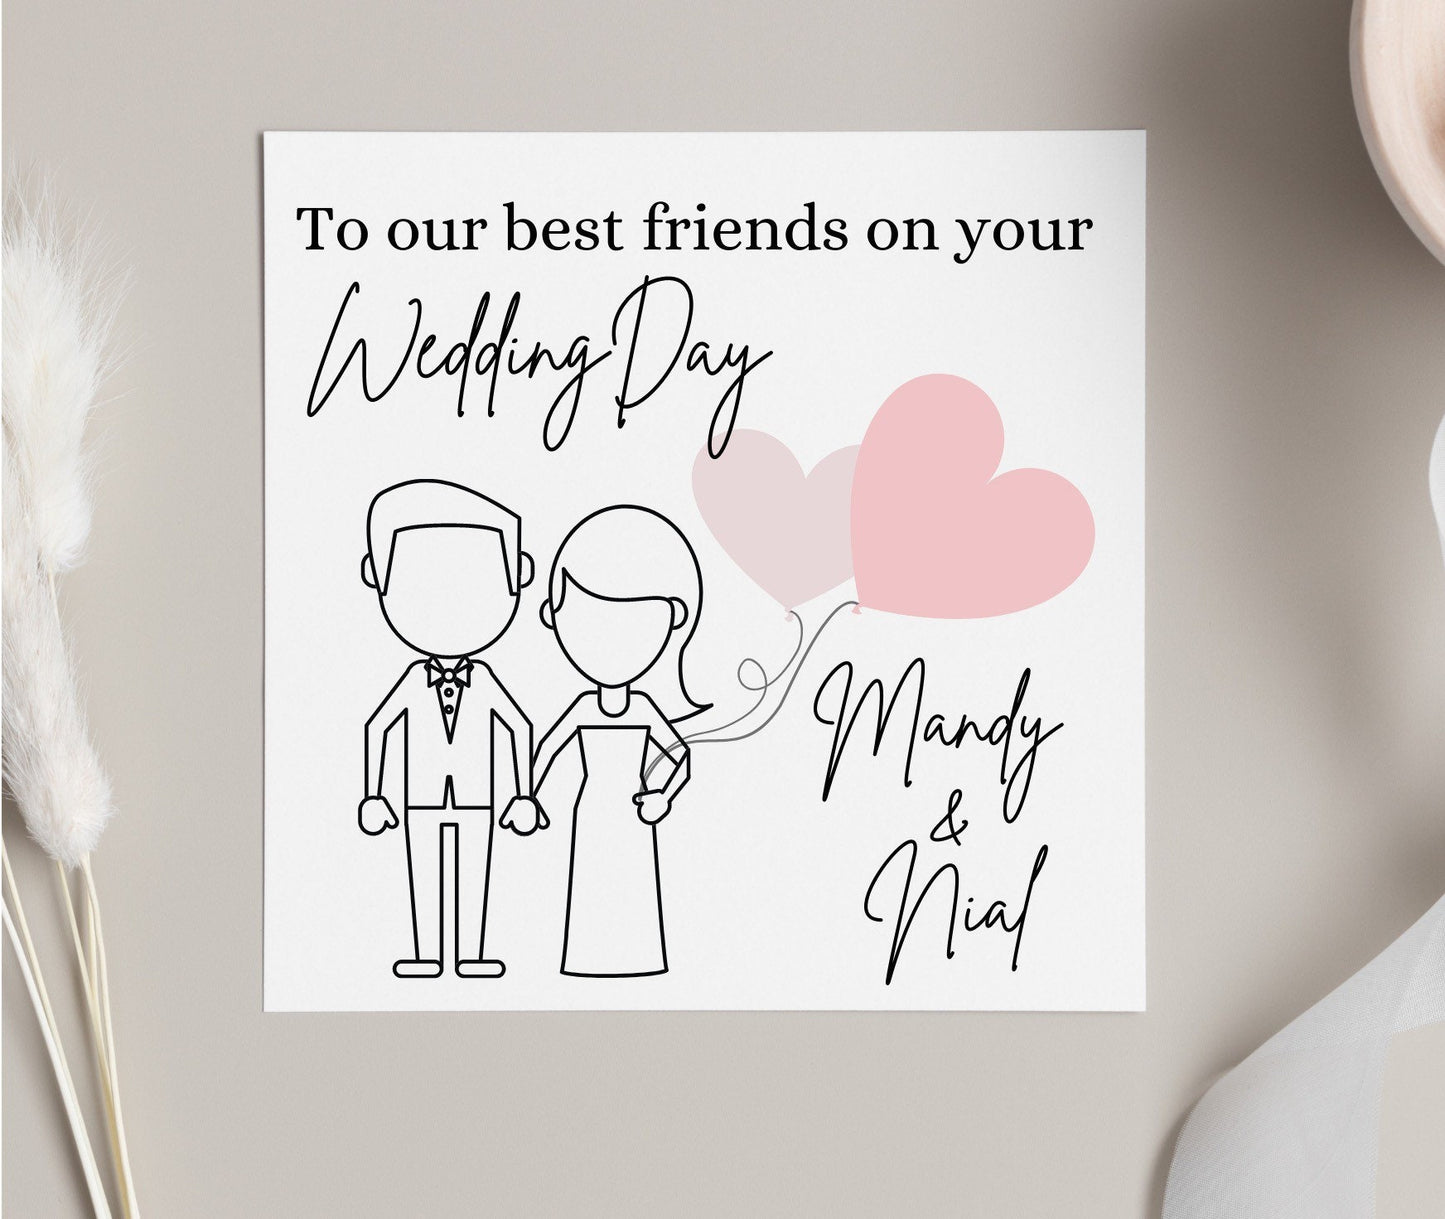 To our best friends on your wedding day card, personalised wedding day card, BFF getting married, friend wedding card